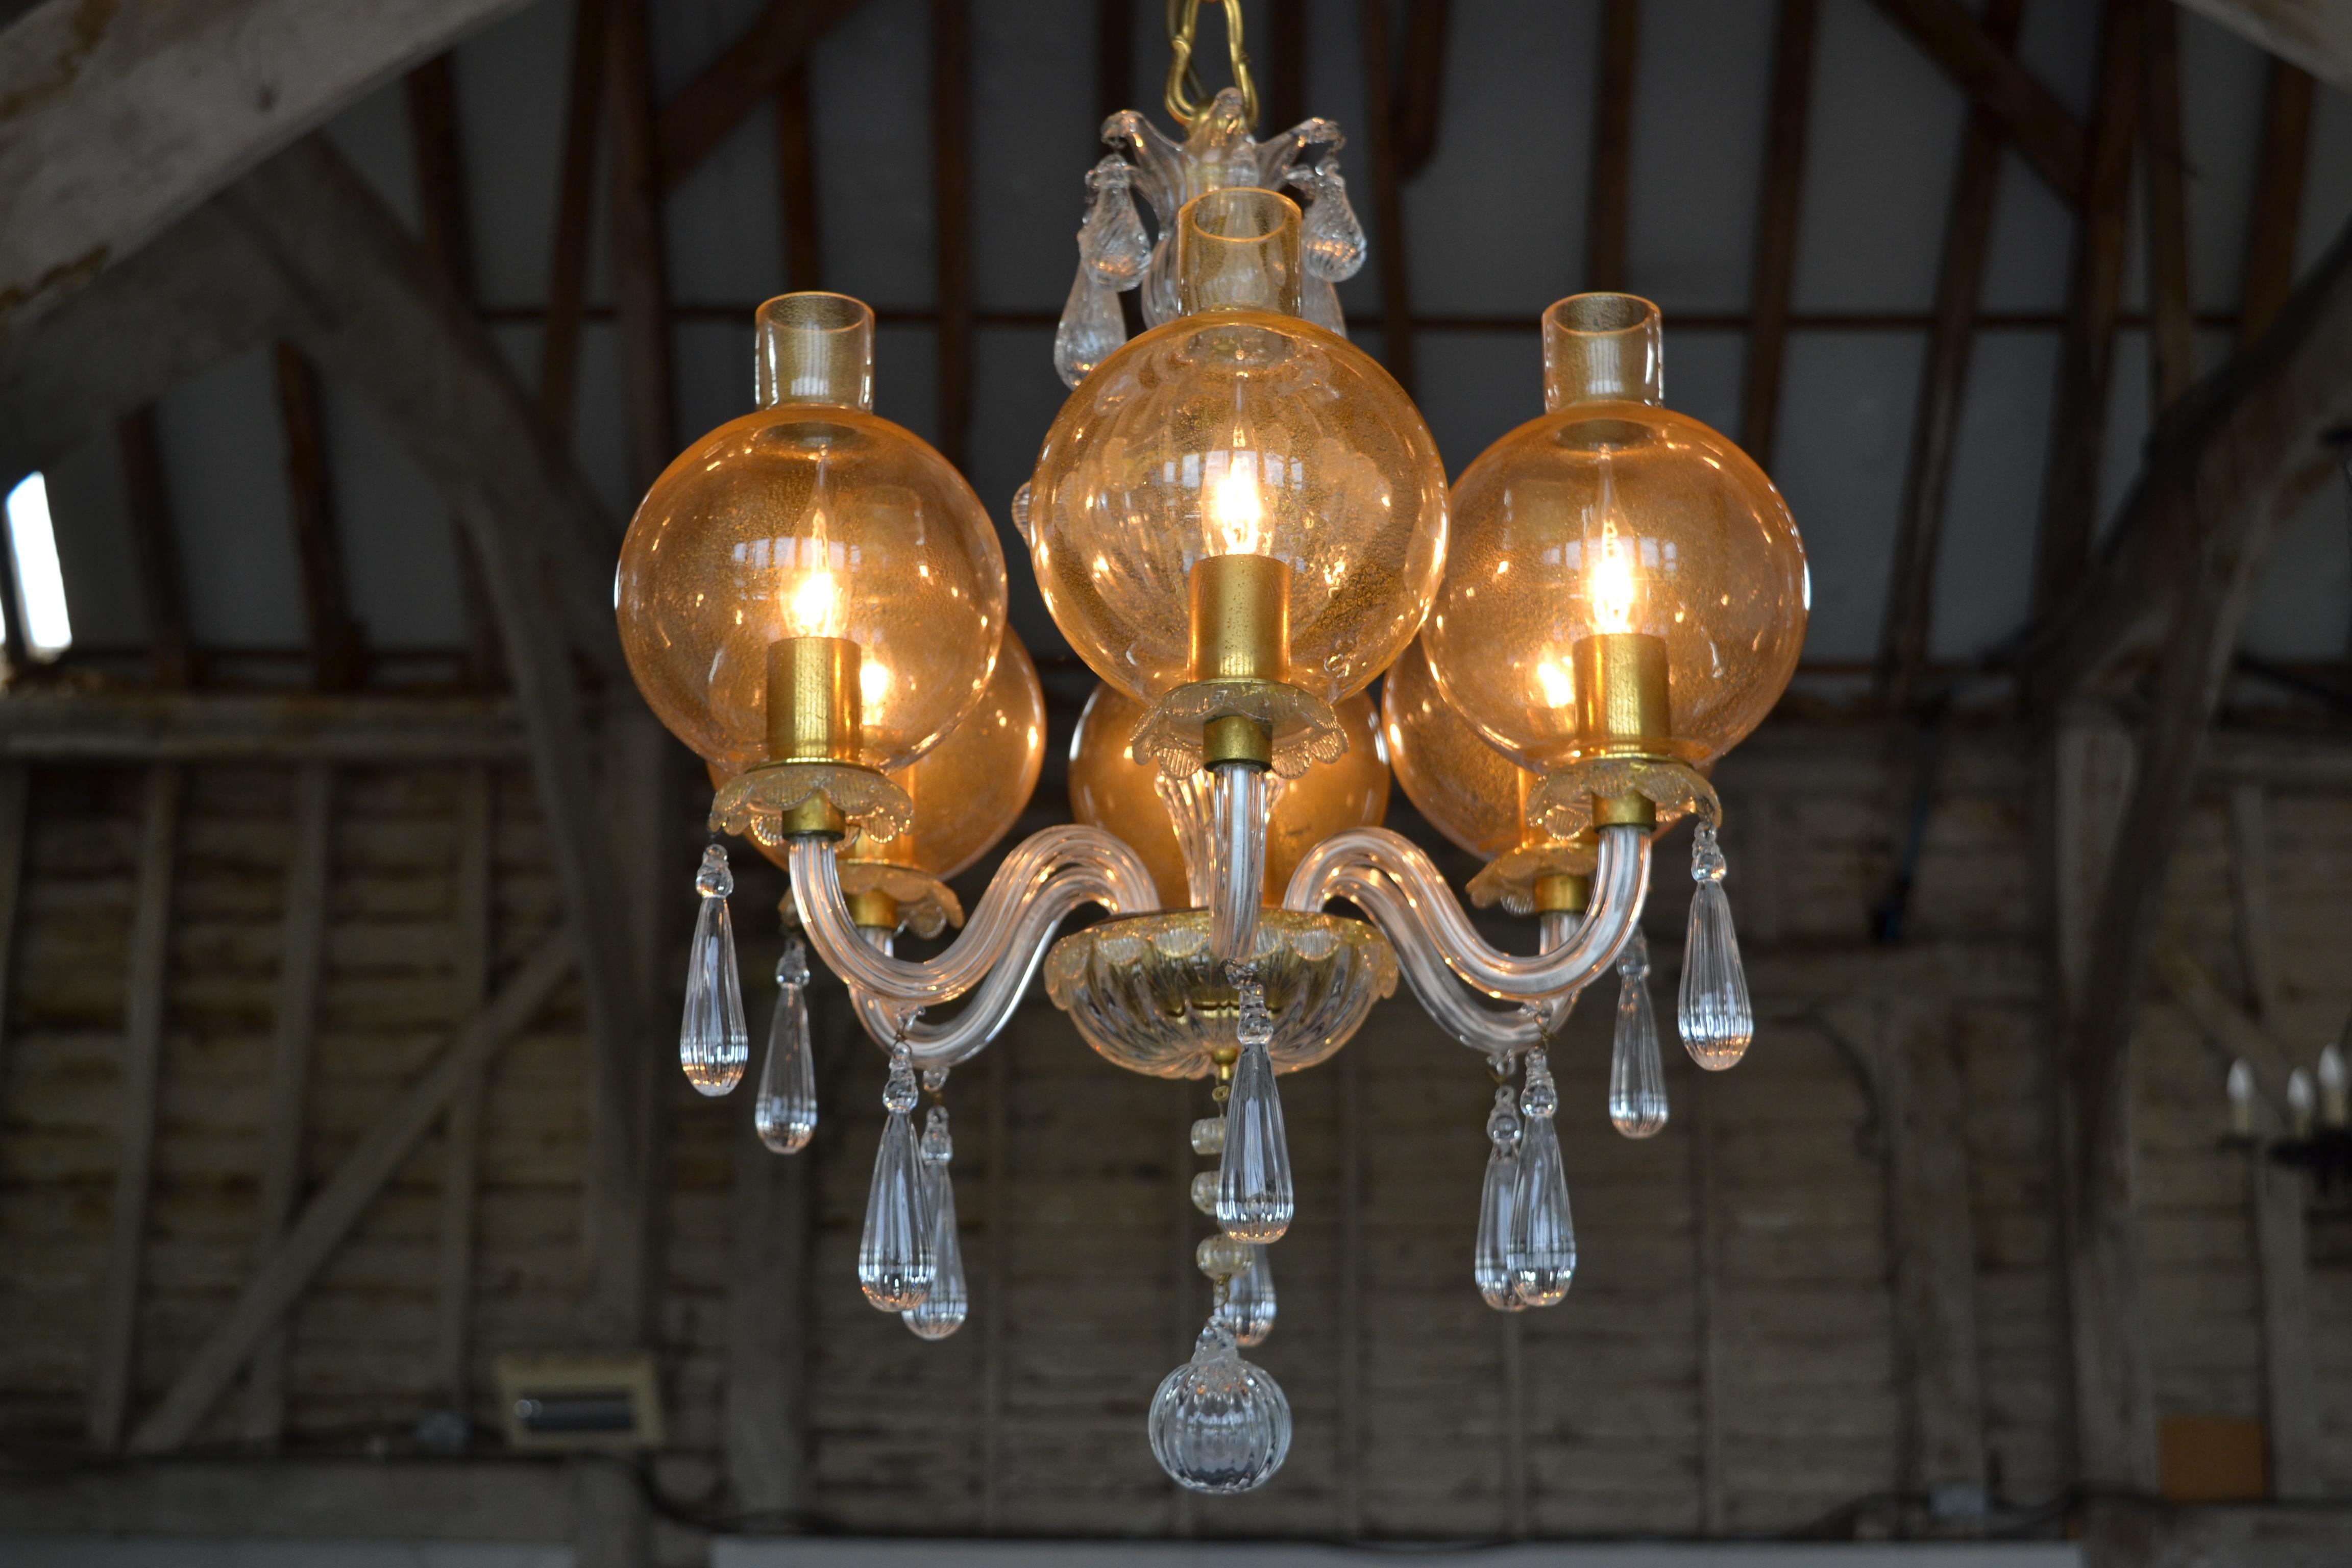 This exquisite Mid-Century Venetian Chandelier has 6 lights, classic Venetian detailing and extremely unusual Gold Flecked Storm Shades, we have never seen another chandelier quite like it. Perfect for a smaller living room or hallway.